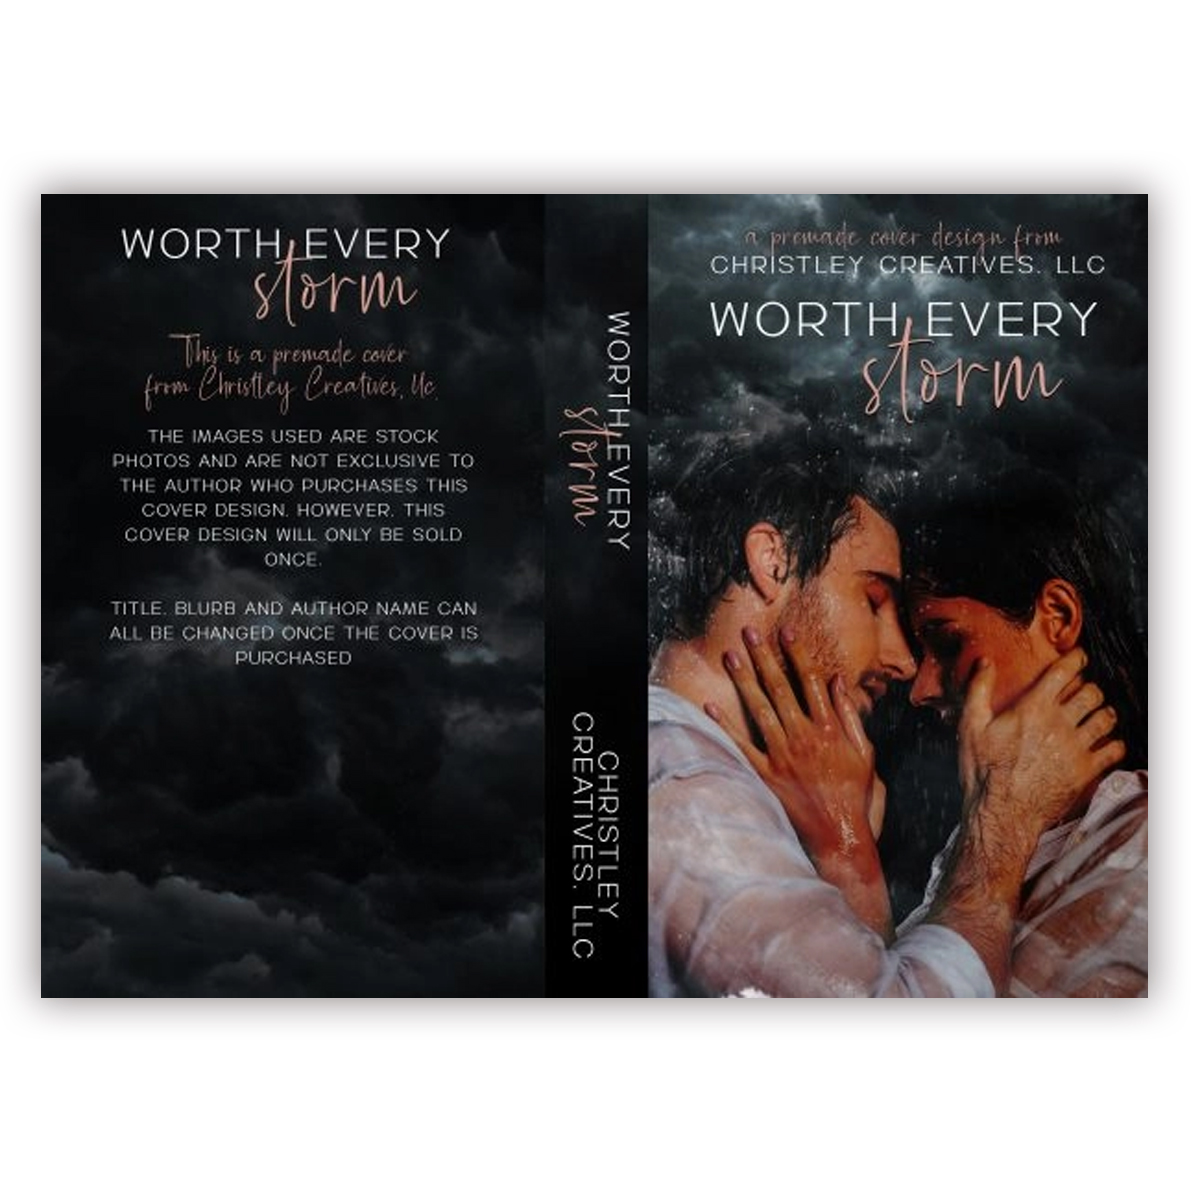 Worth Every Storm - - Premade Contemporary Romance Book Cover from Christley Creatives